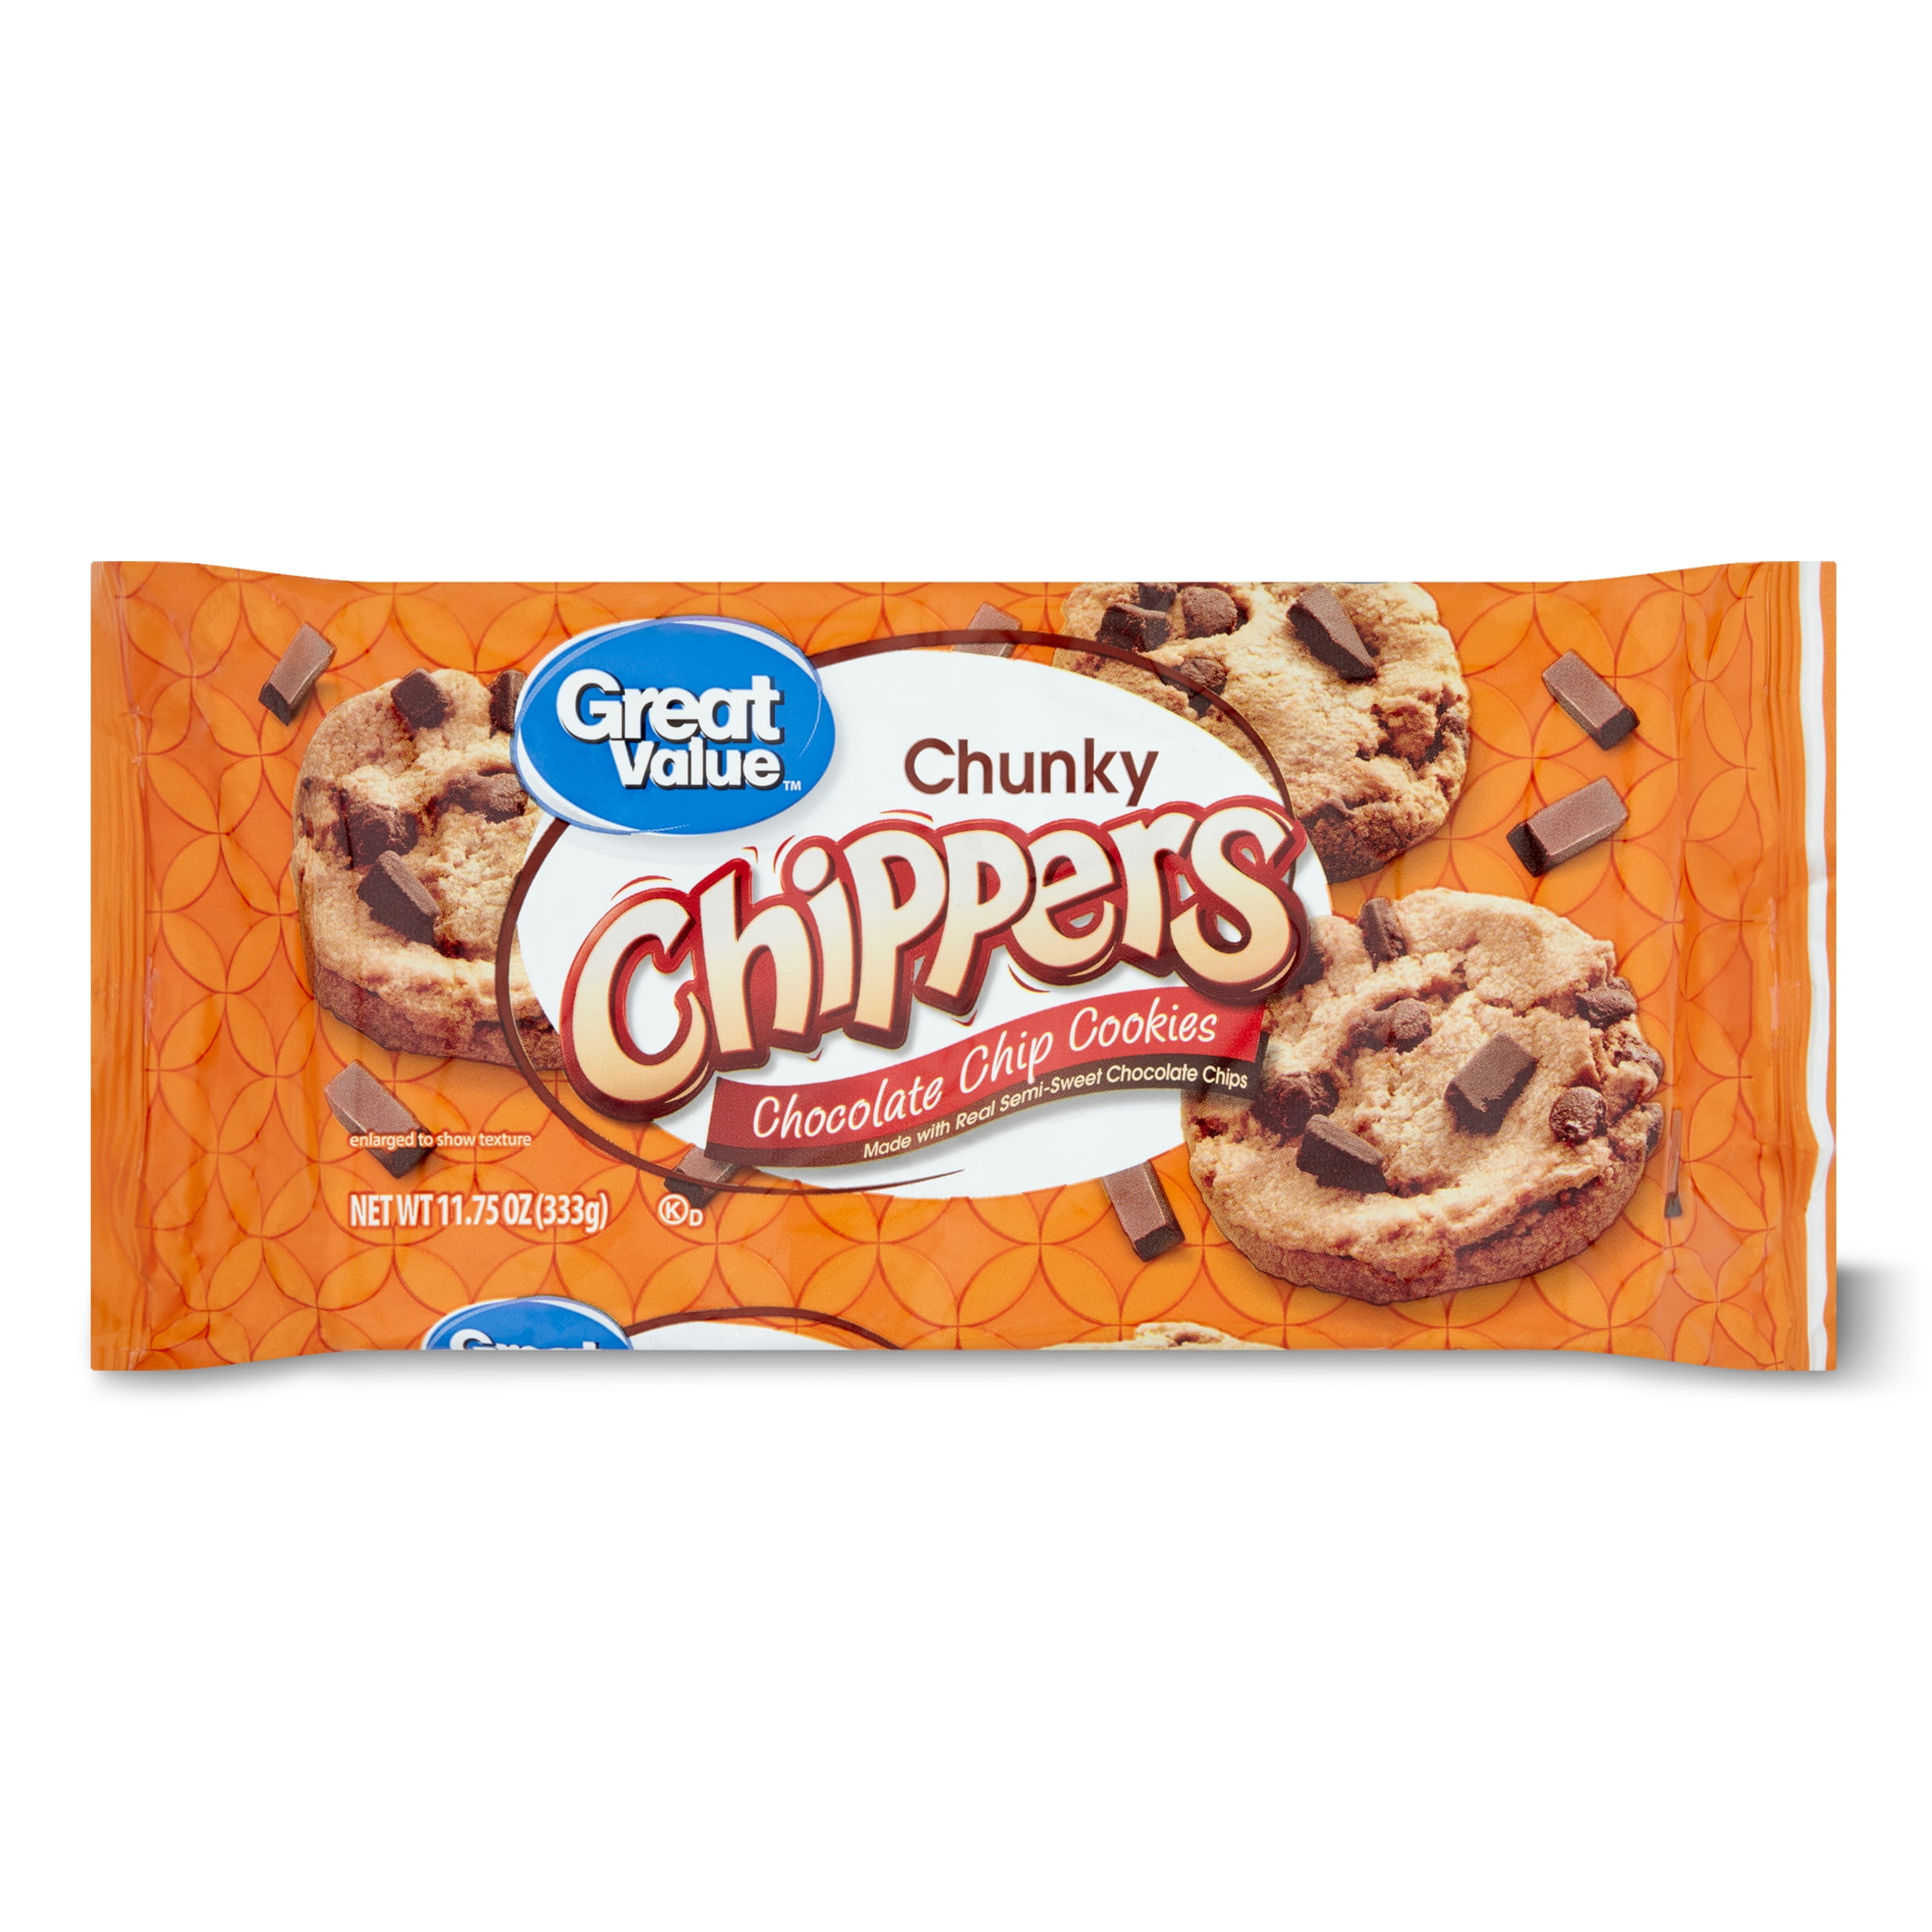 Great Value Chunky Chippers Chocolate Chip Cookies, 11.75 Oz.